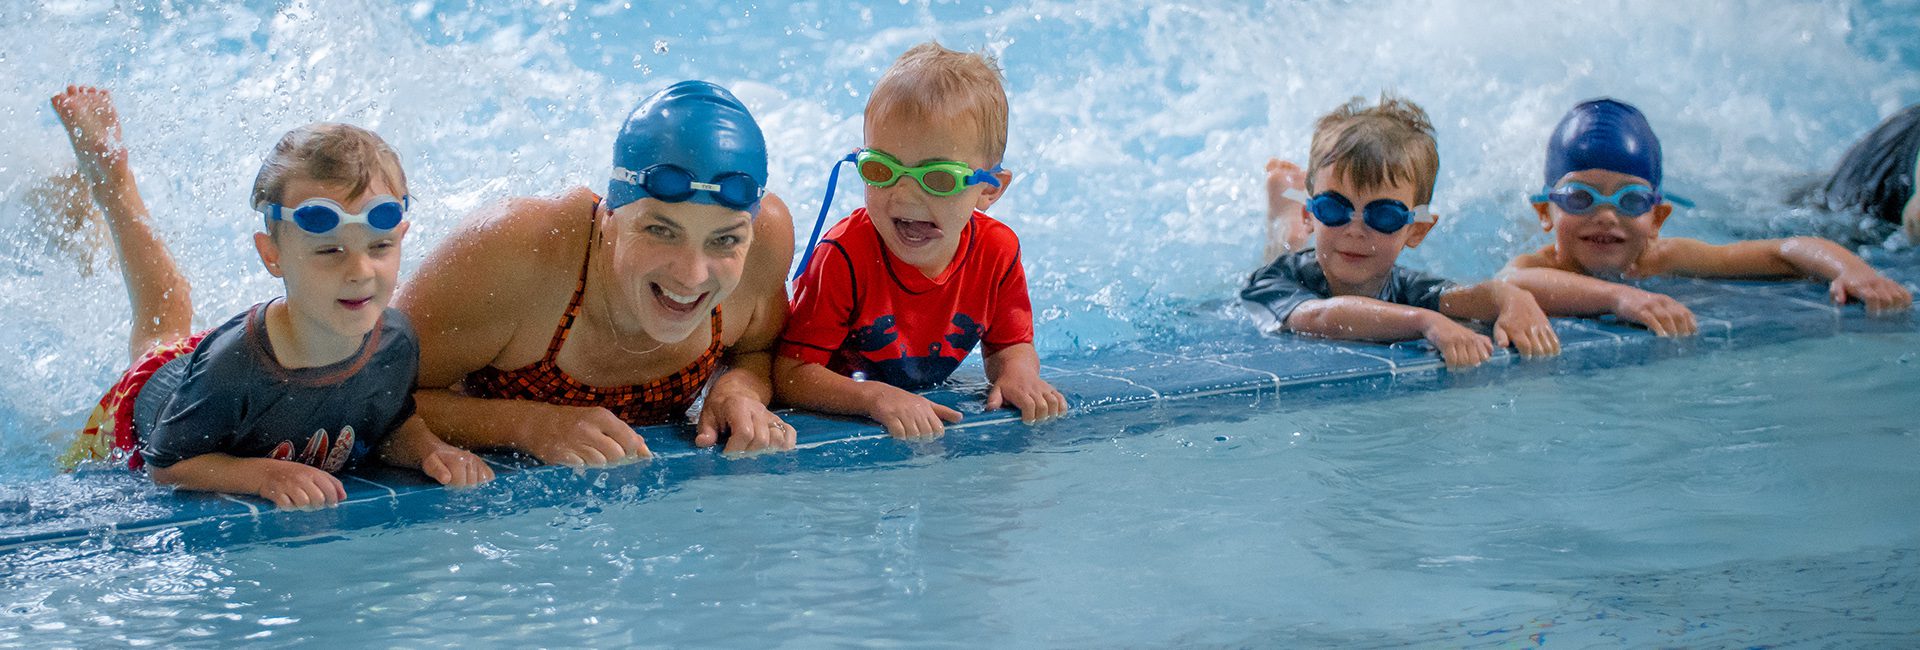 woman and kids smiling in an aquatic center